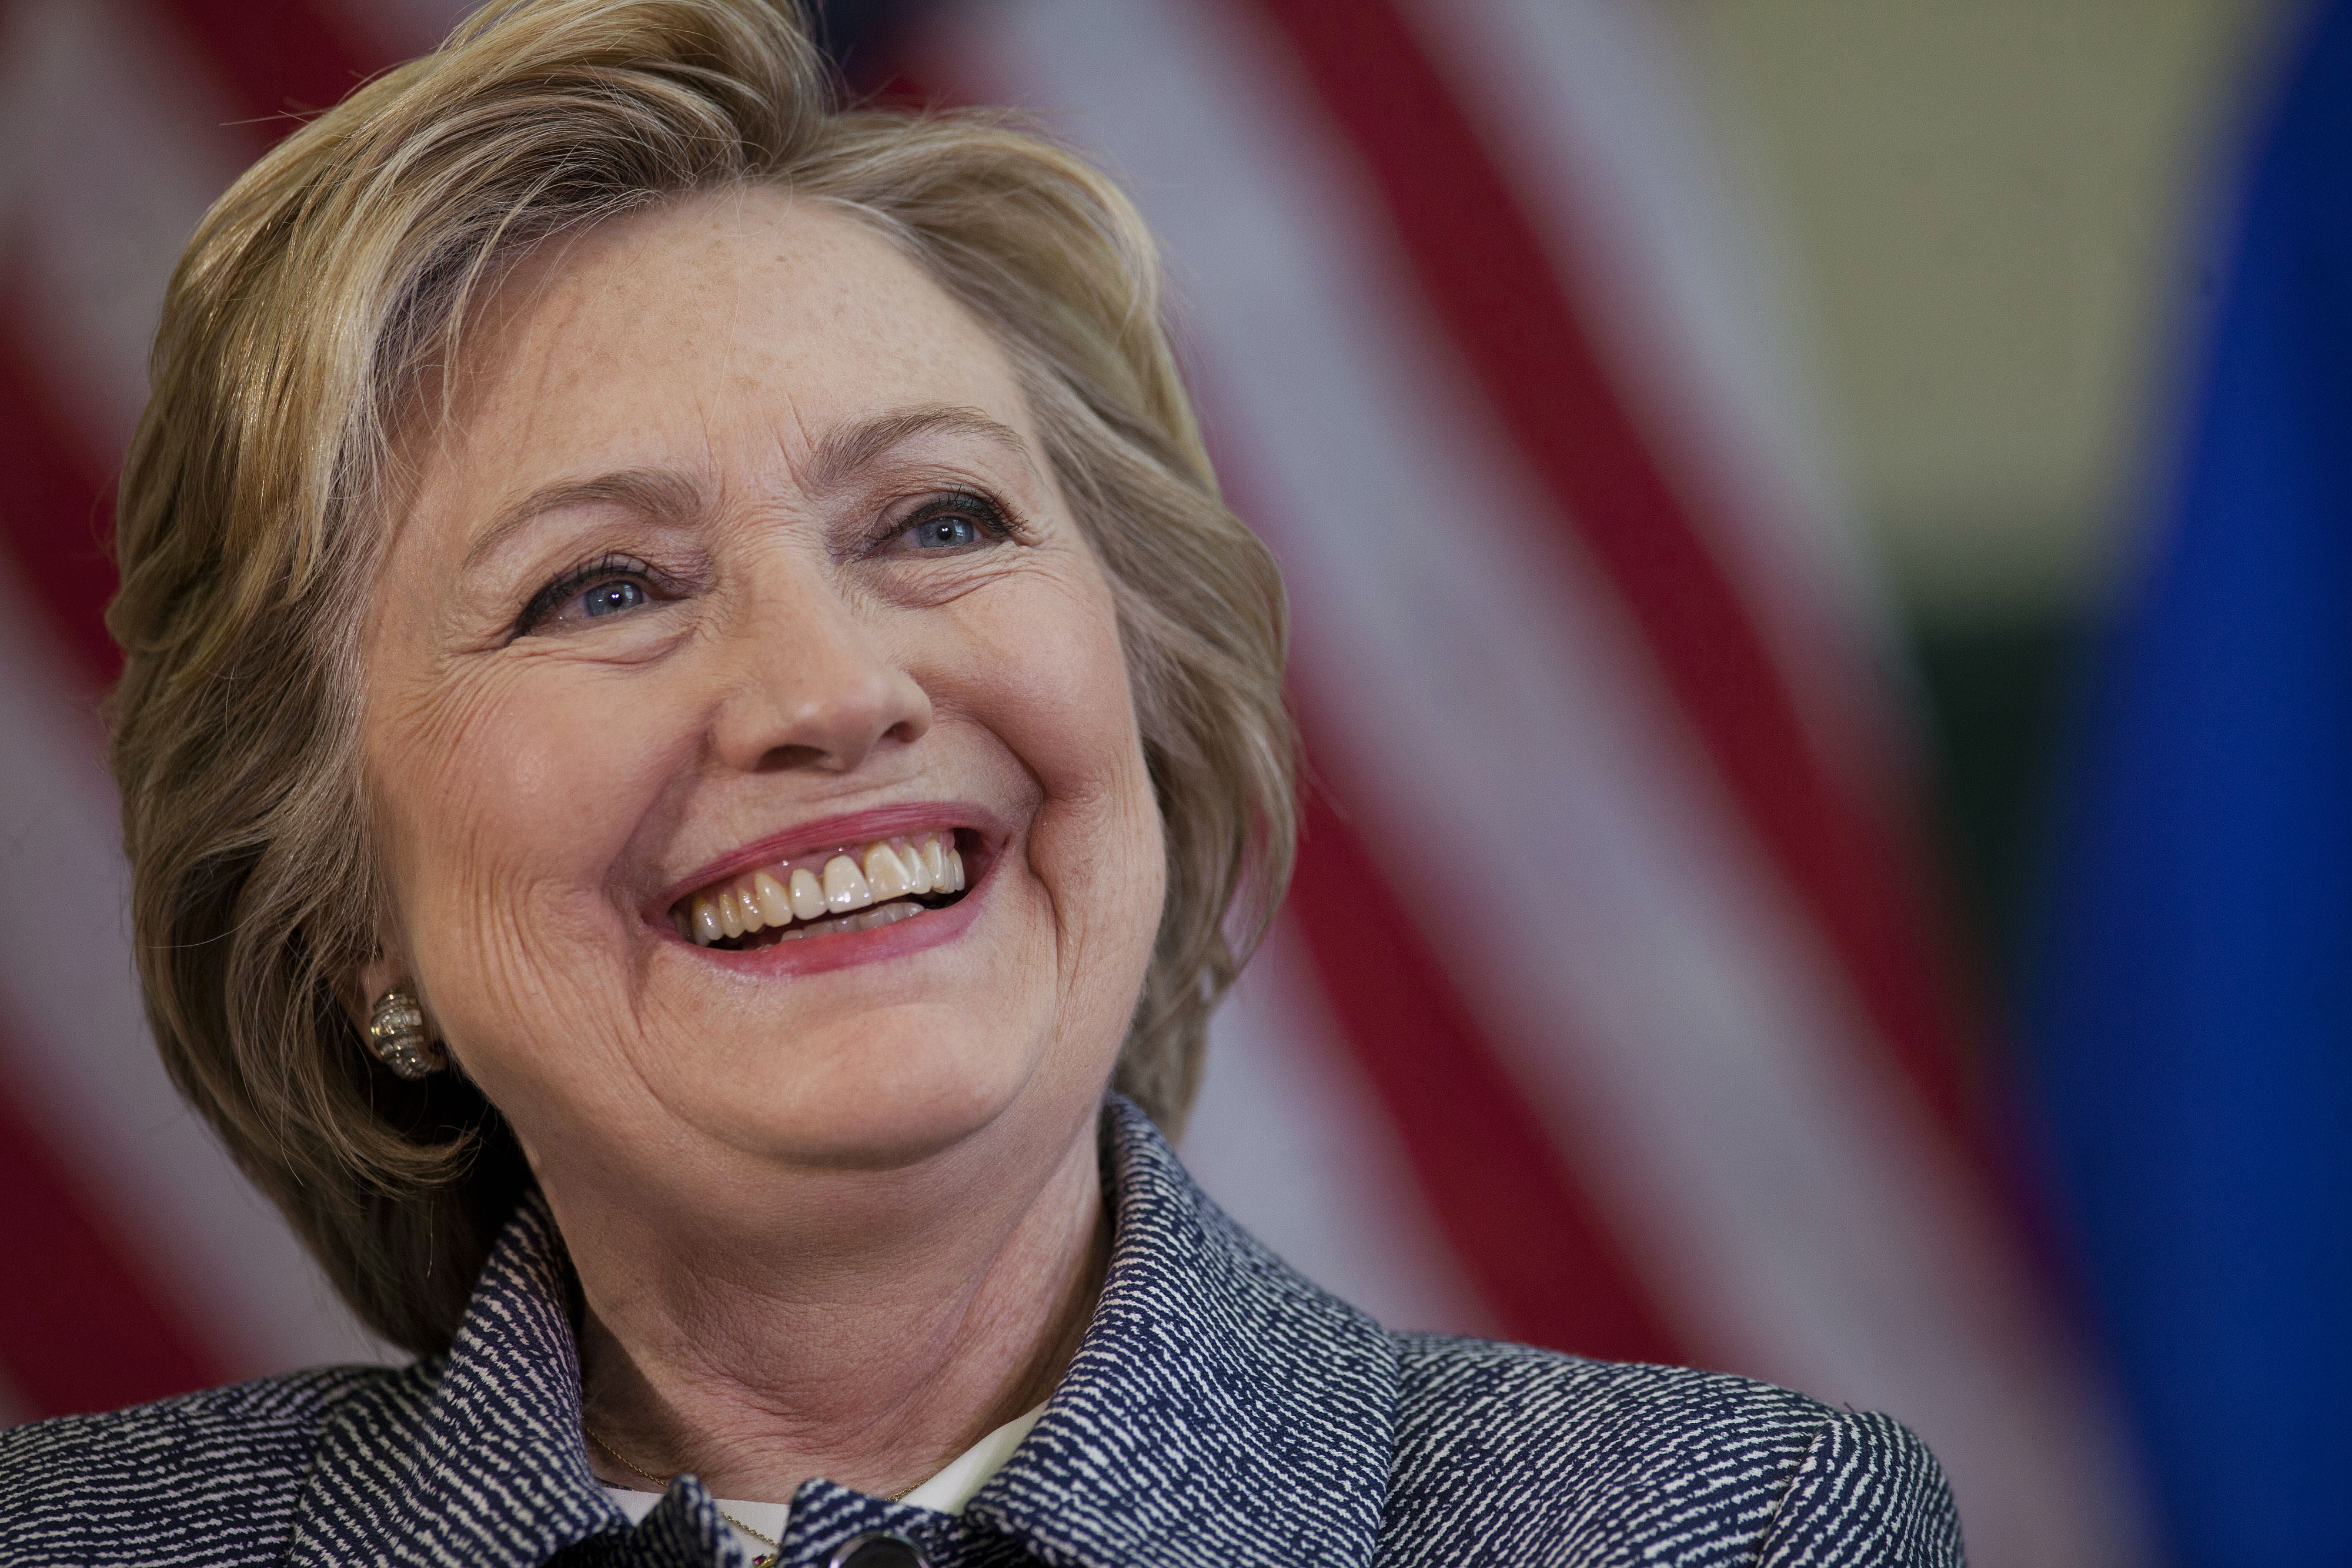 Hillary Clinton, former Secretary of State and 2016 Democratic presidential candidate, smiles while speaking during a campaign event in Hartford, Conn., on April 21, 2016.